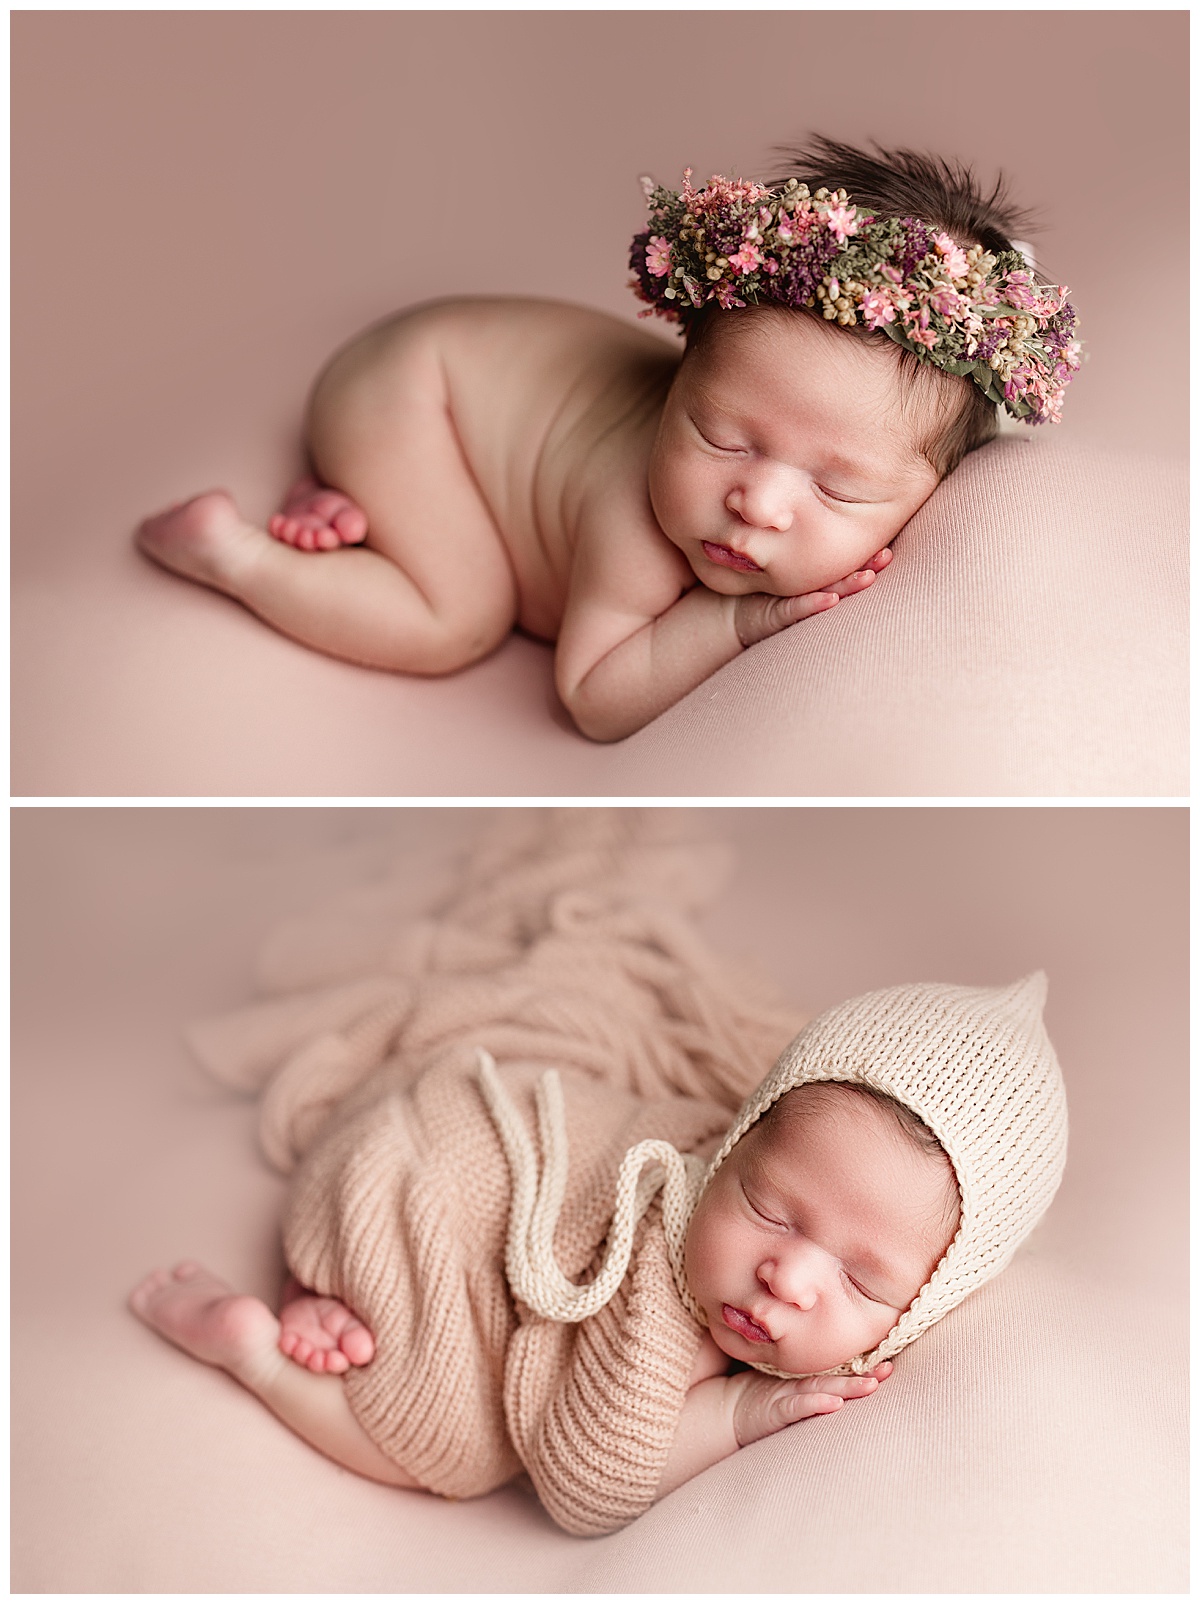 Baby girl wear flower crown and sleeps so Posed and Perfect